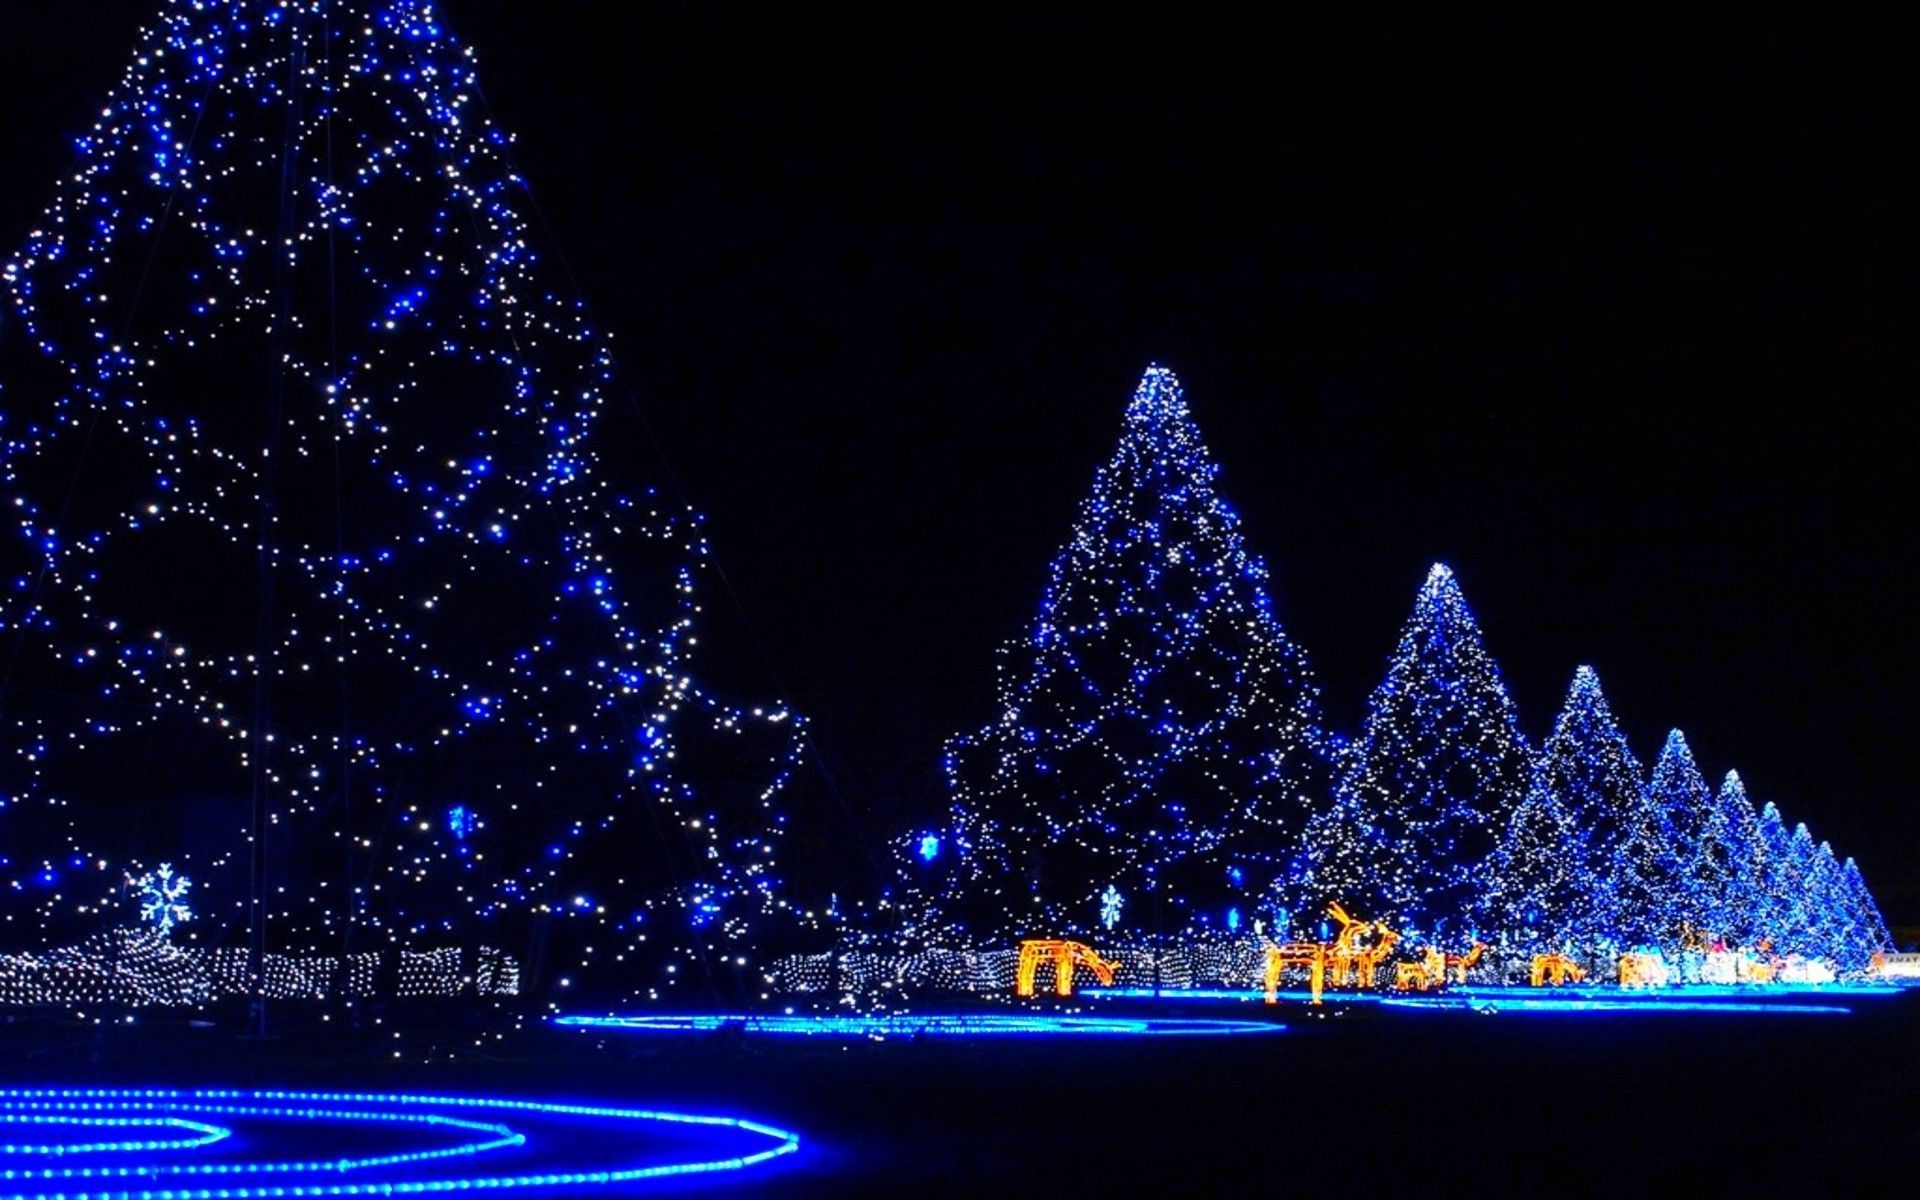 Christmas Lights Backgrounds | Wallpapers, Backgrounds, Images, Art Photos.